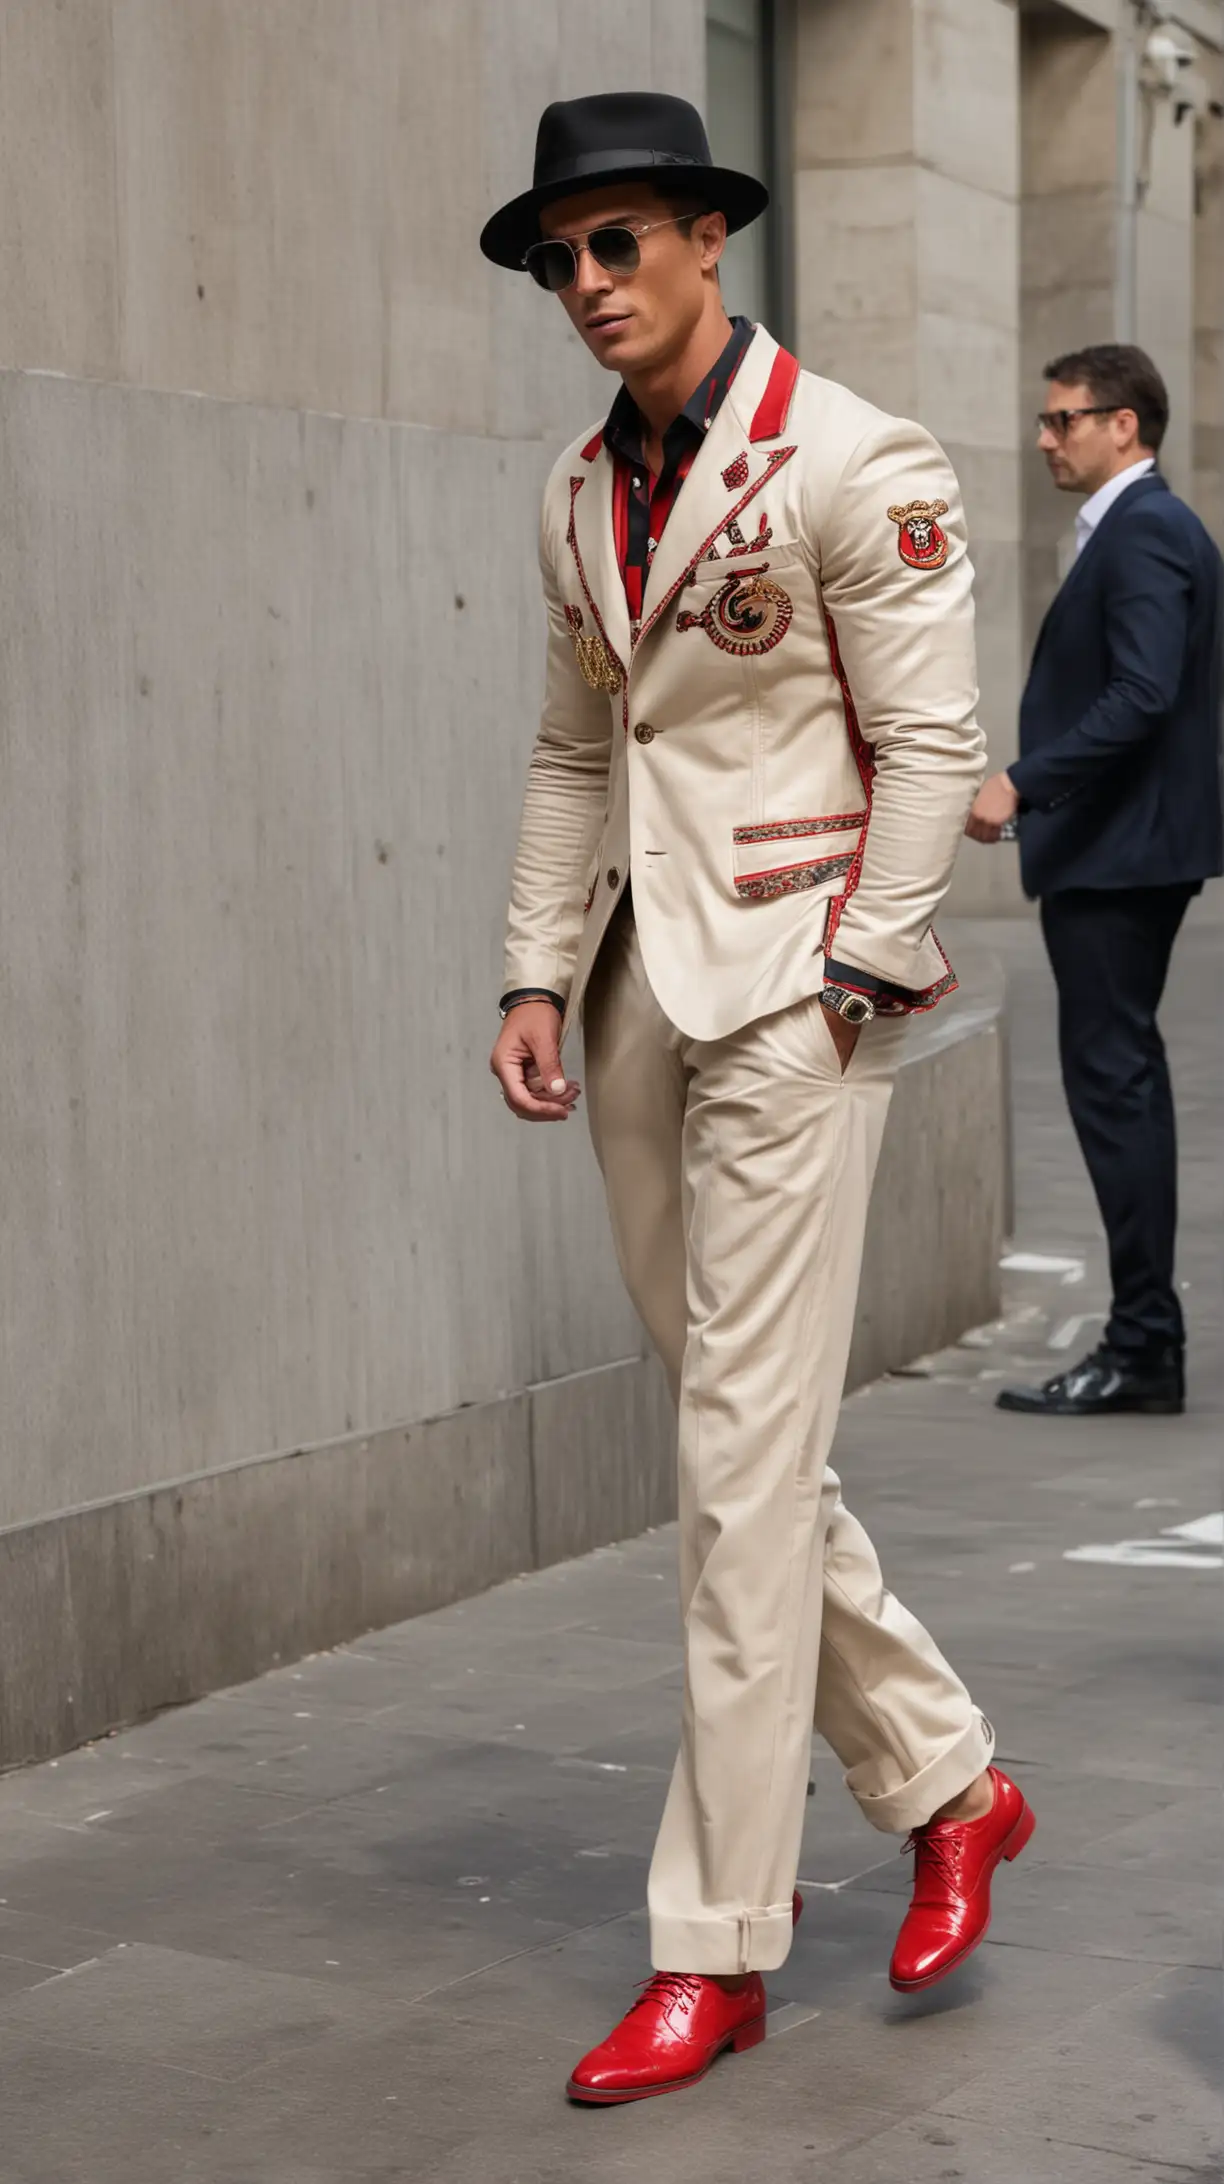 Cristiano Ronaldo Wearing Gucci Jacket. trousers. red shoes. glasses. hat. walking at Fashion week contrasts. shot From the Far Front